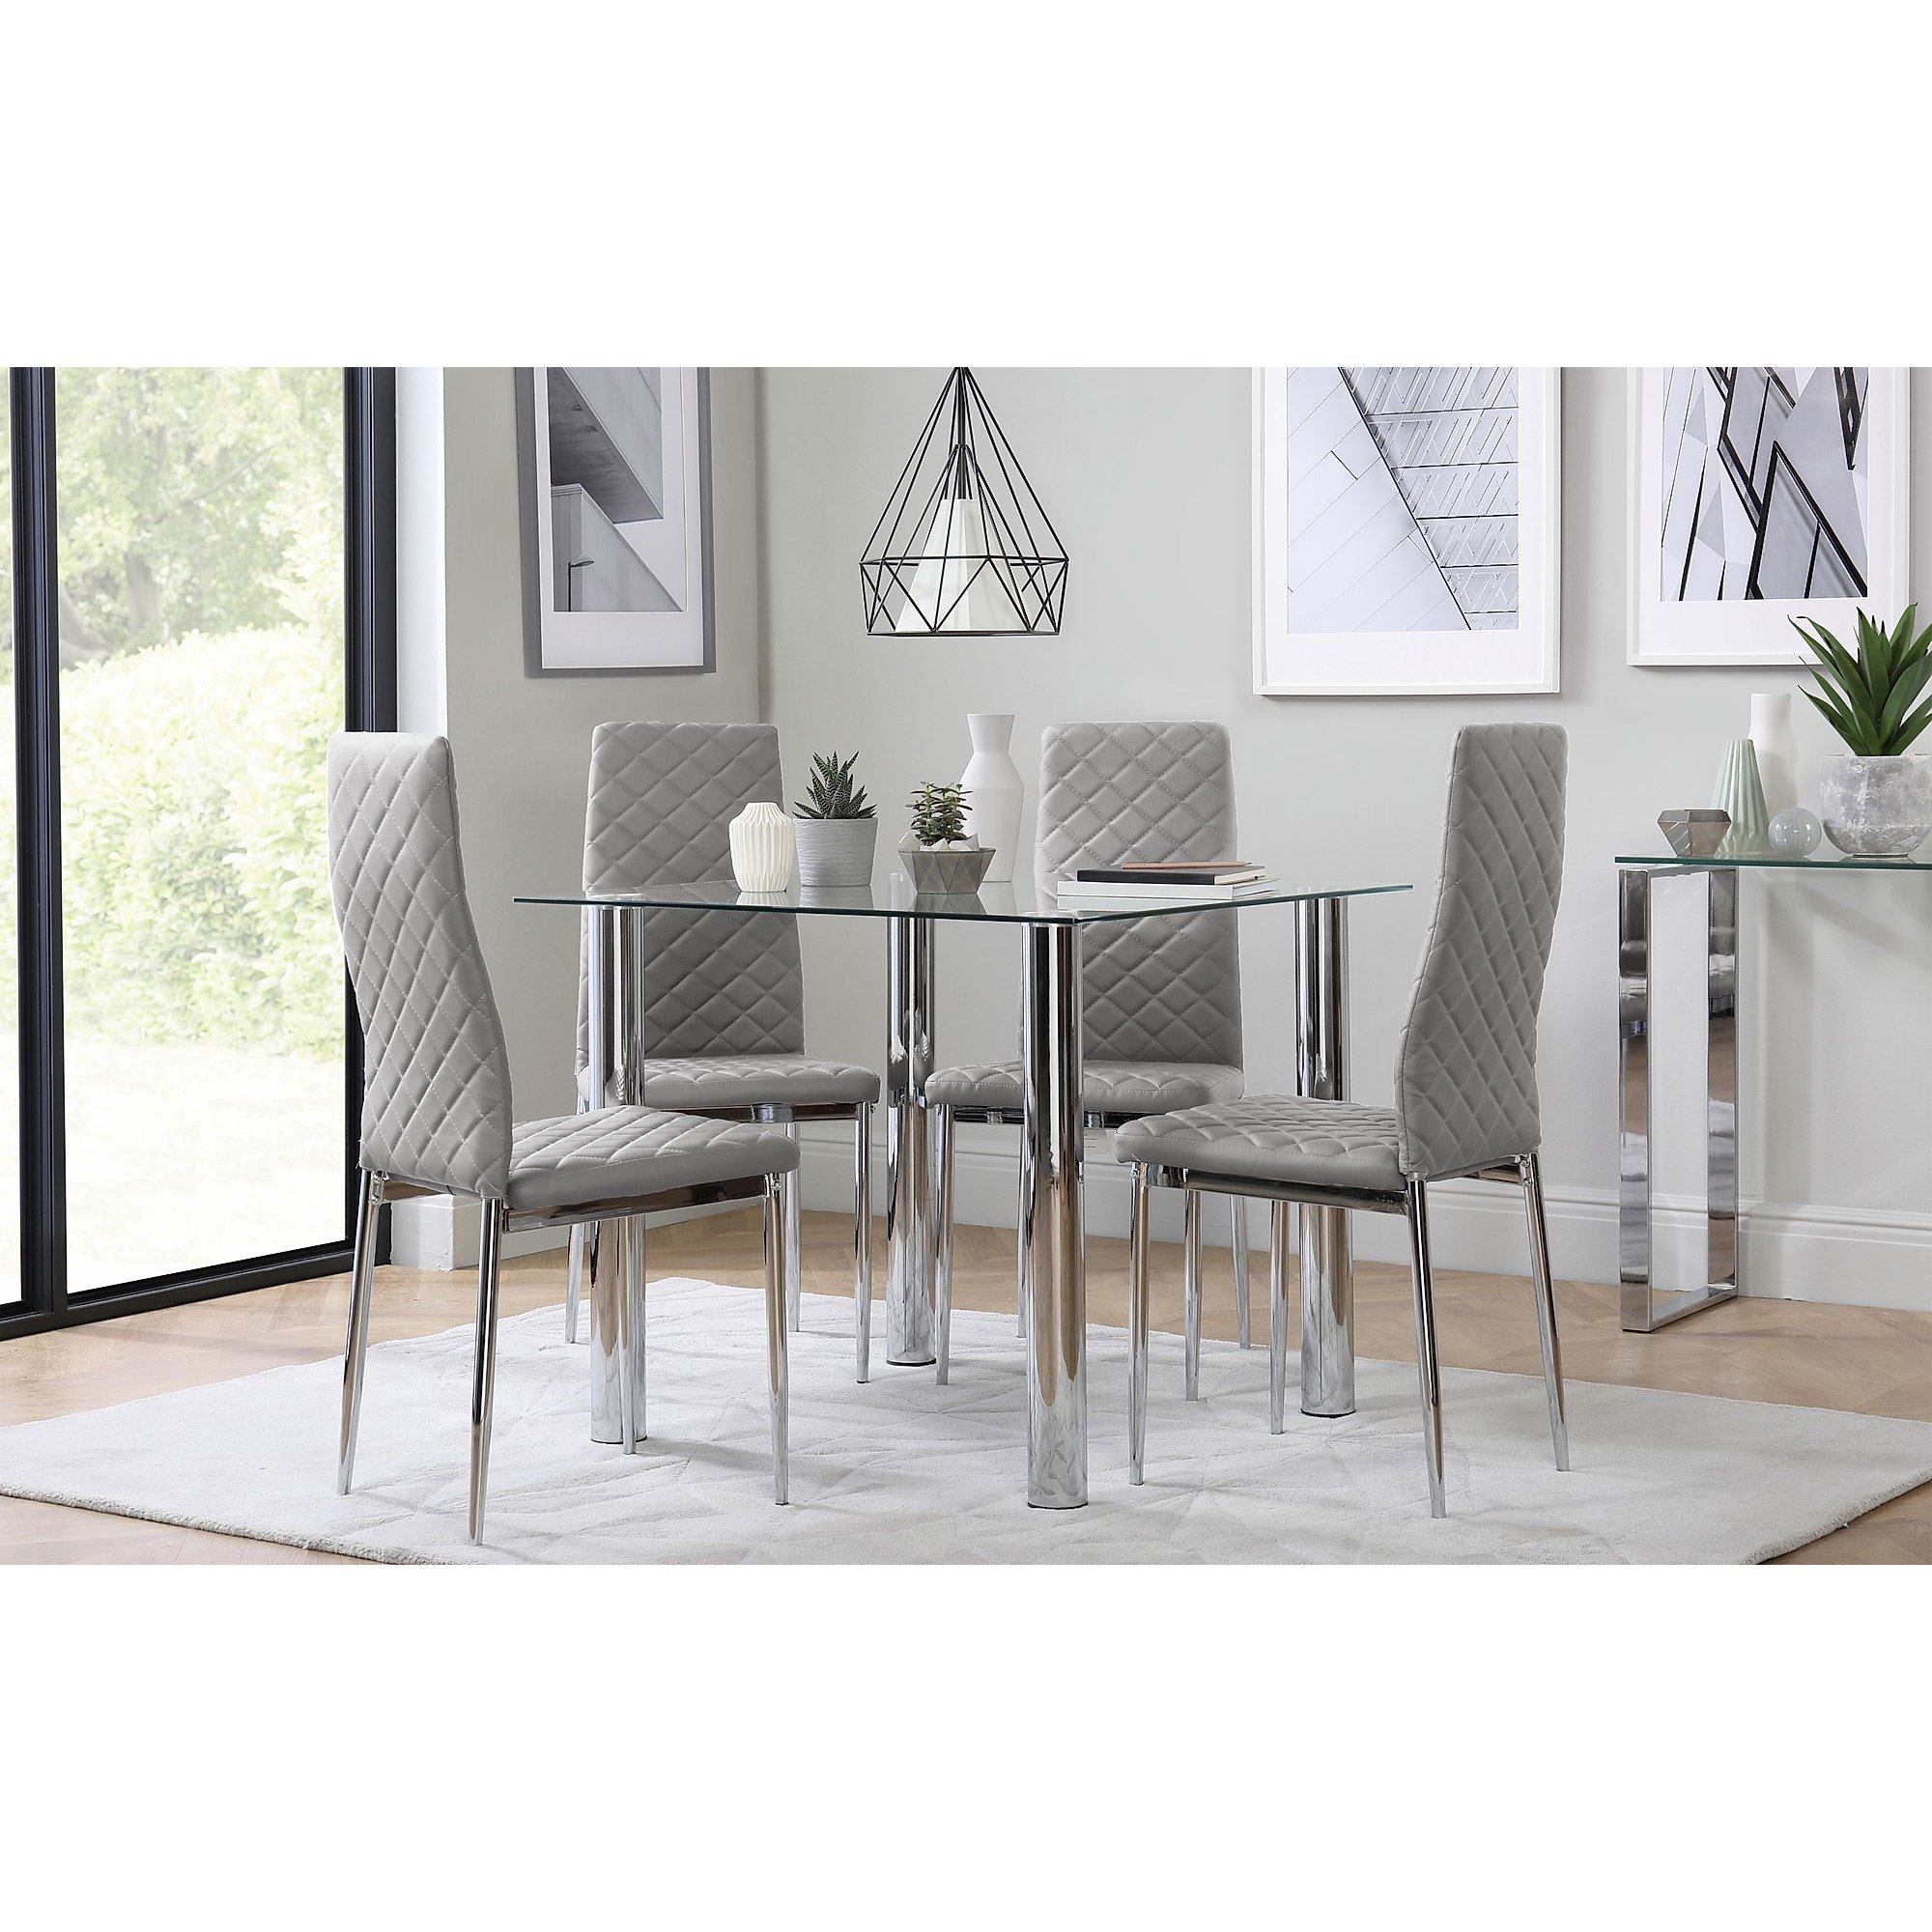 Nova Square Glass and Chrome Dining Table with 4 Renzo Light Grey Leather Chairs